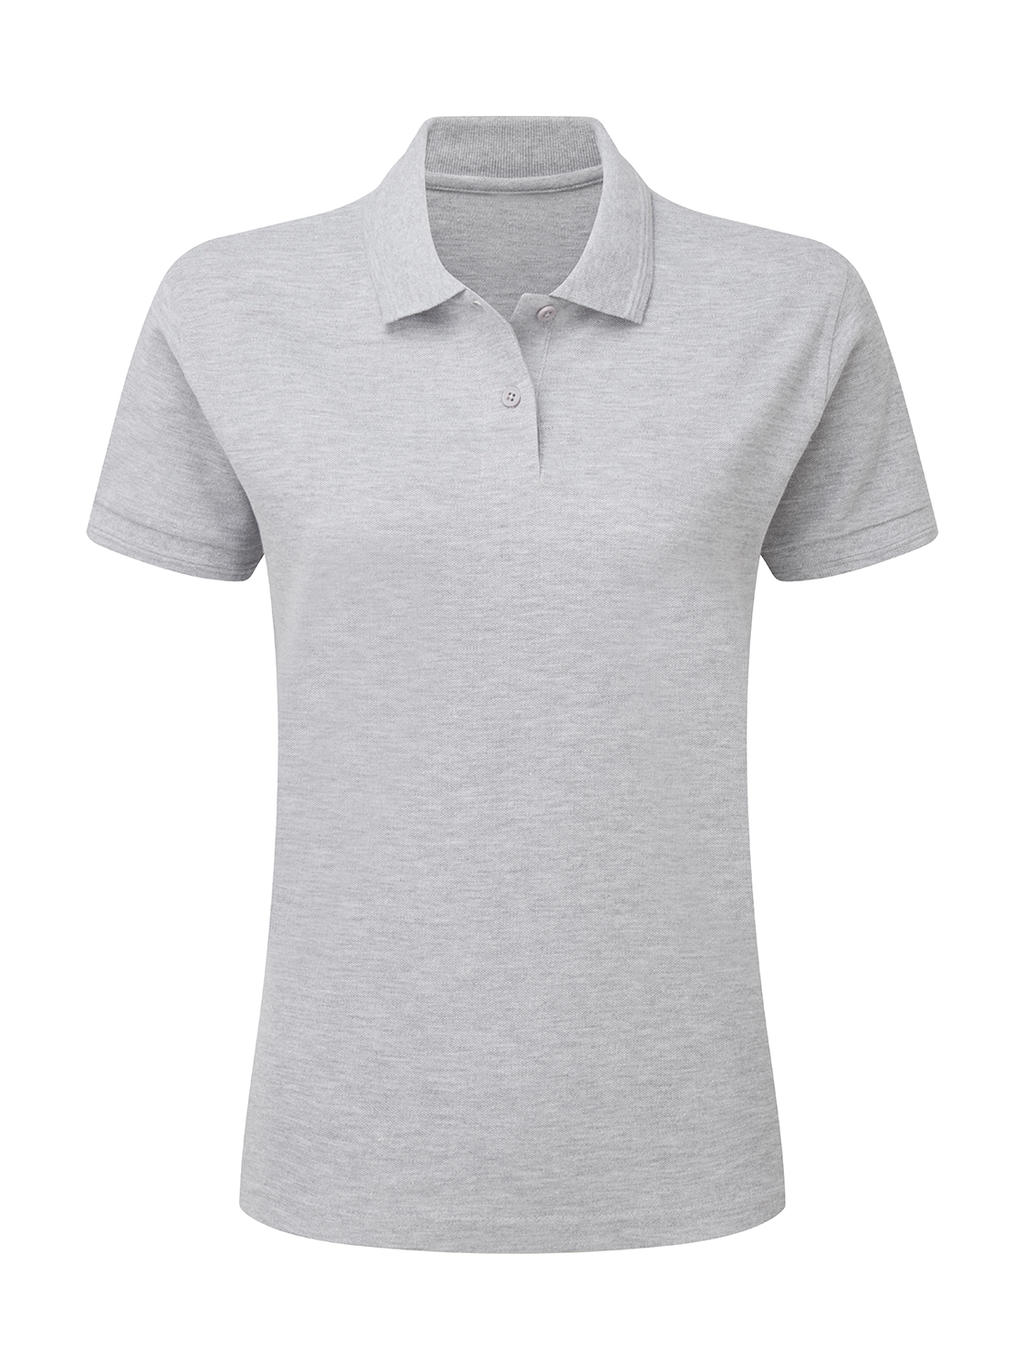  Ladies Poly Cotton Polo in Farbe Light Oxford